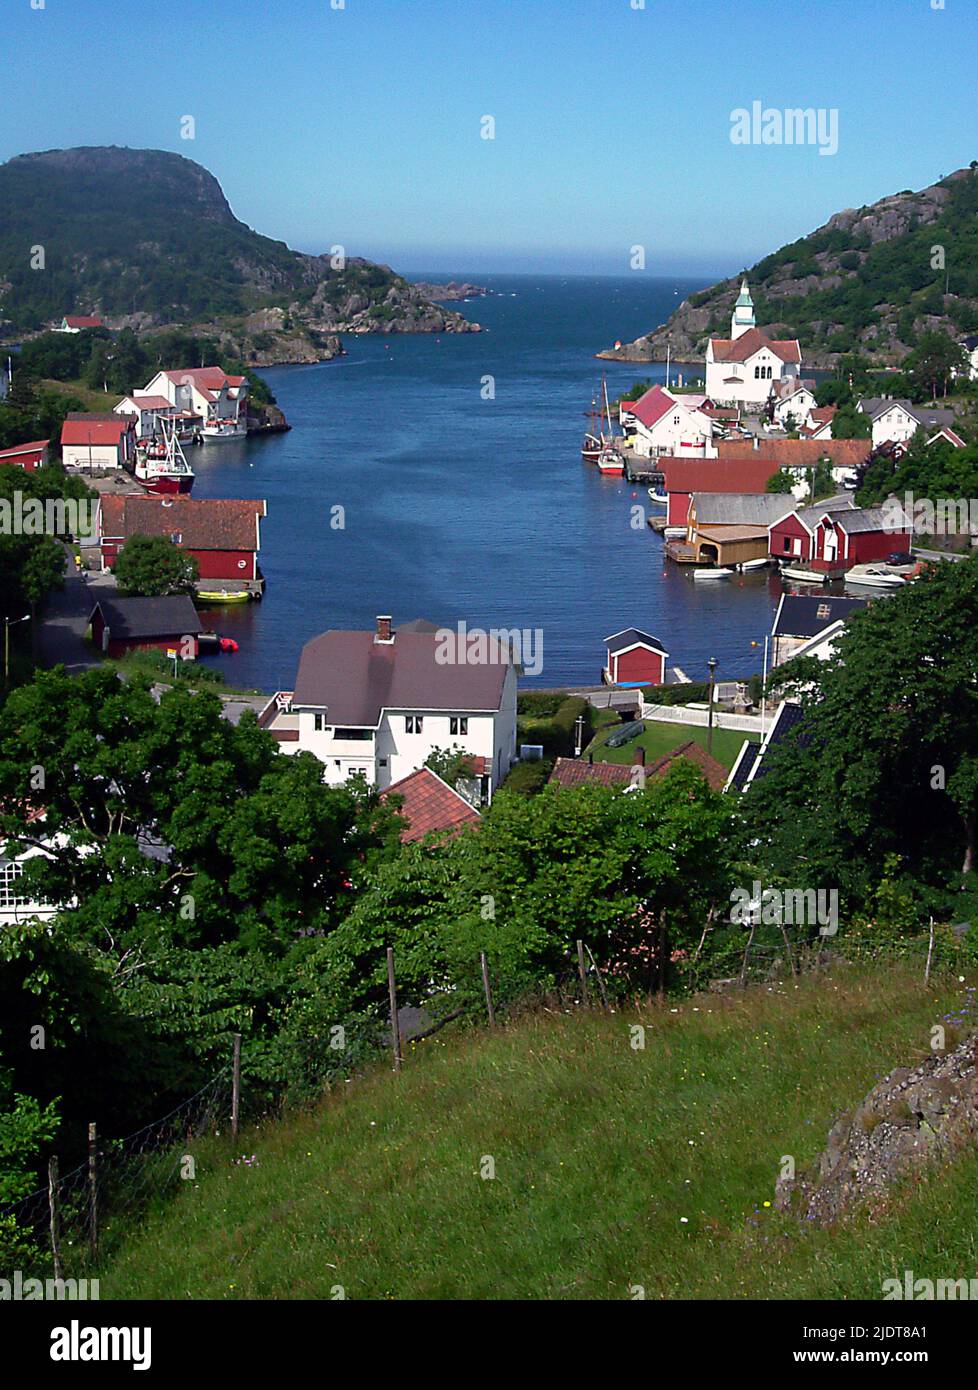 The village of Kirkehamn (Church Harbor) on the island of Hidra in south-western Norway. Stock Photo